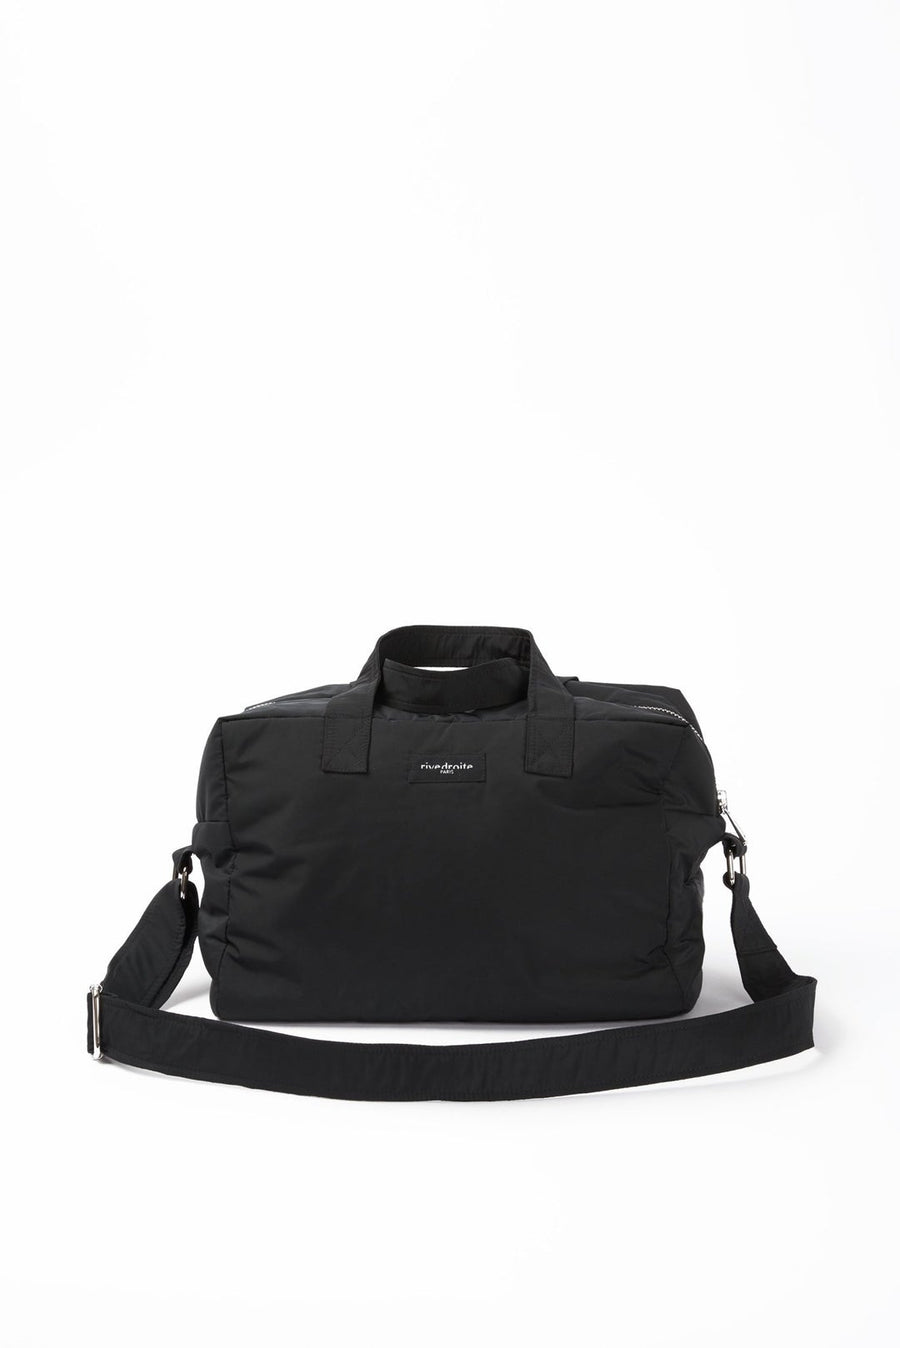 Clery - The City Bag Black